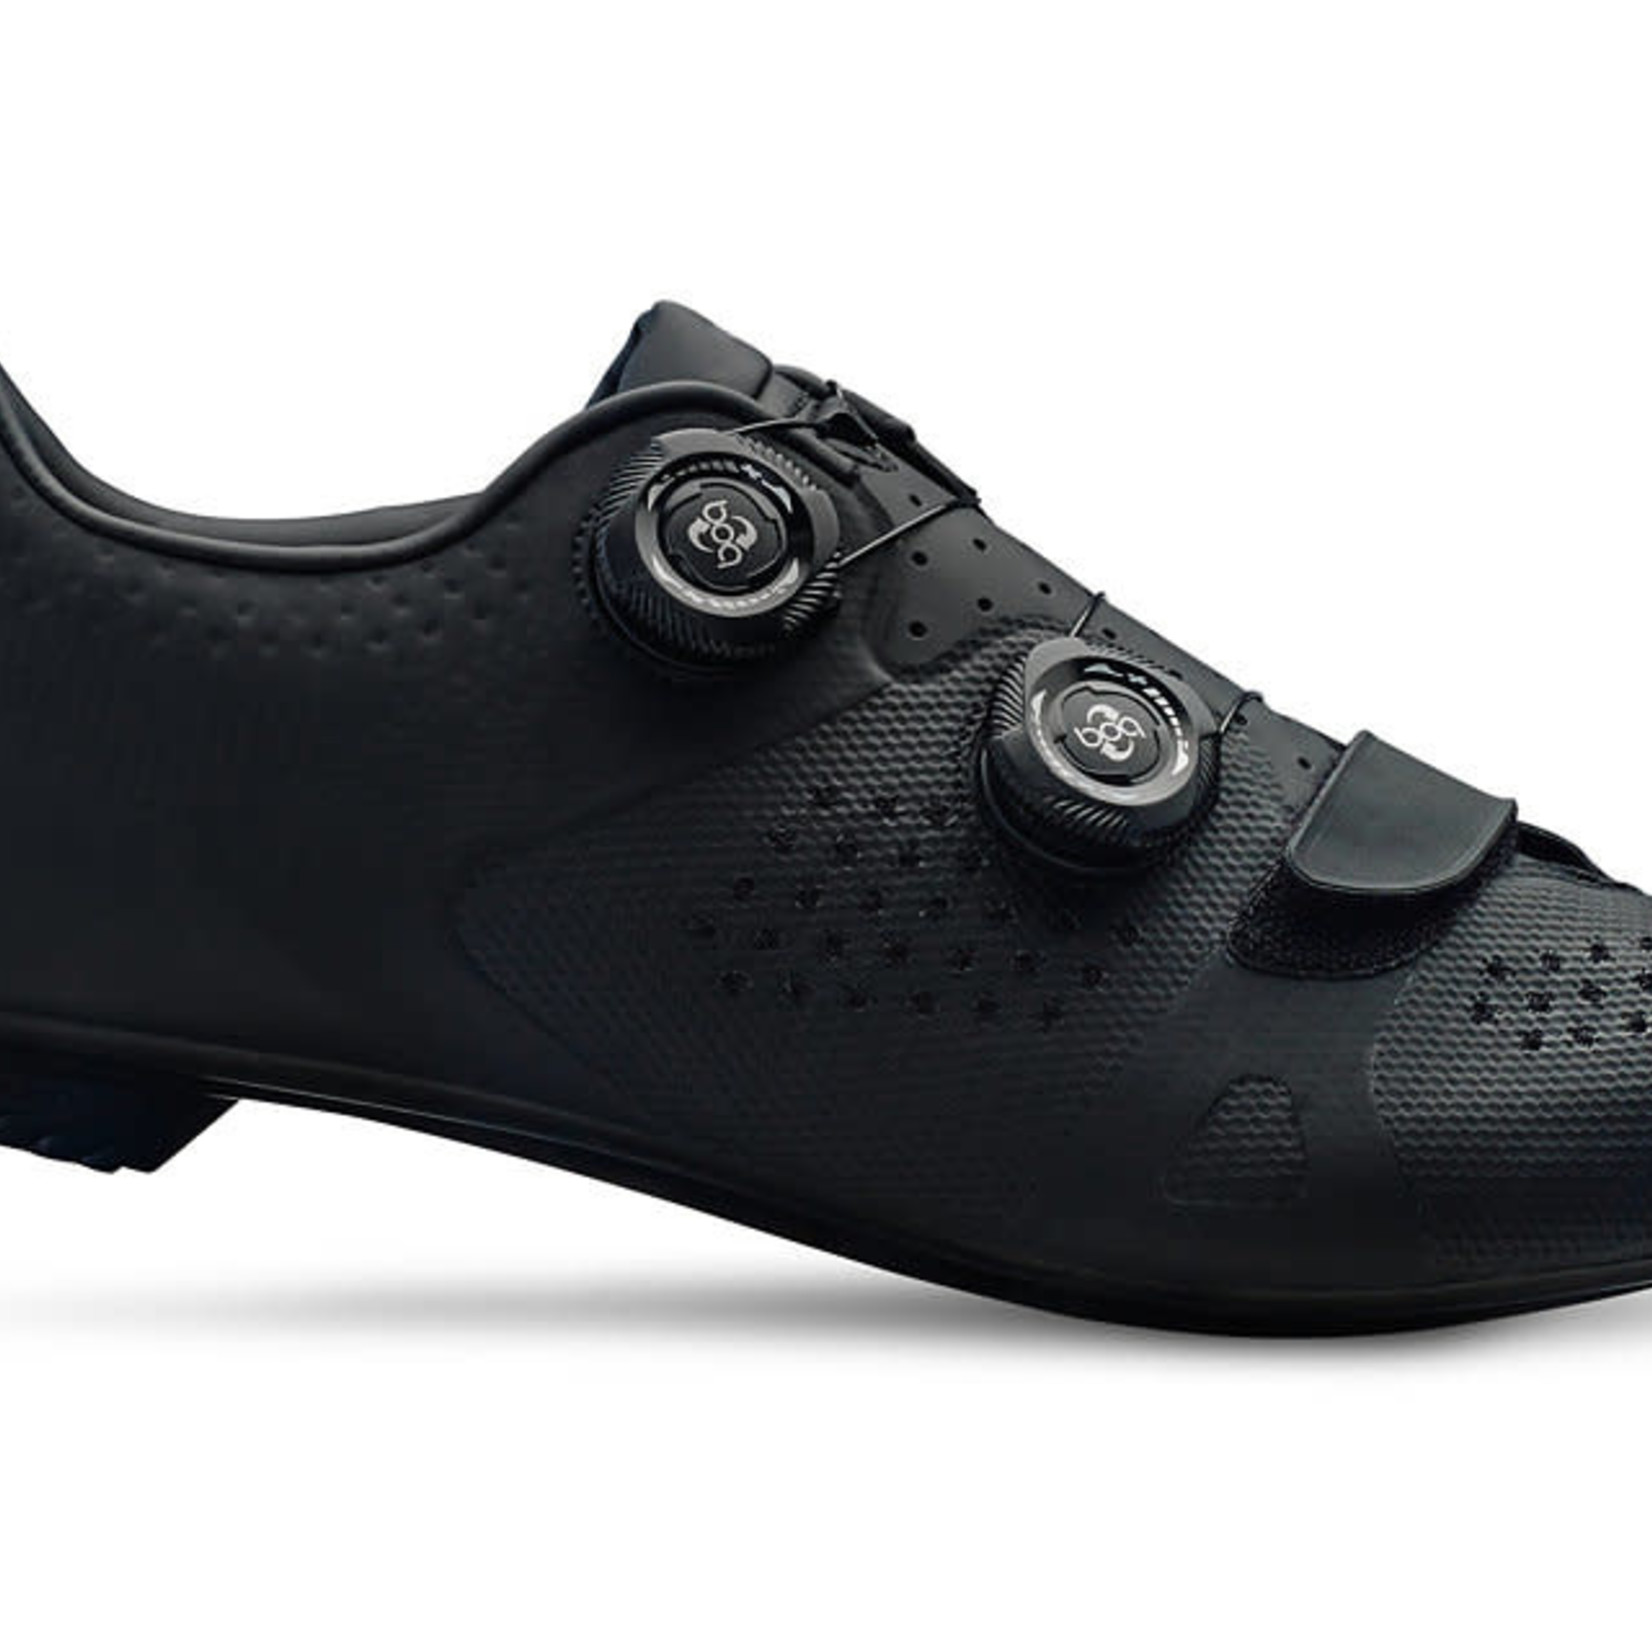 Specialized '19 SPECIALIZED, Torch 3.0 Road Shoes BLACK